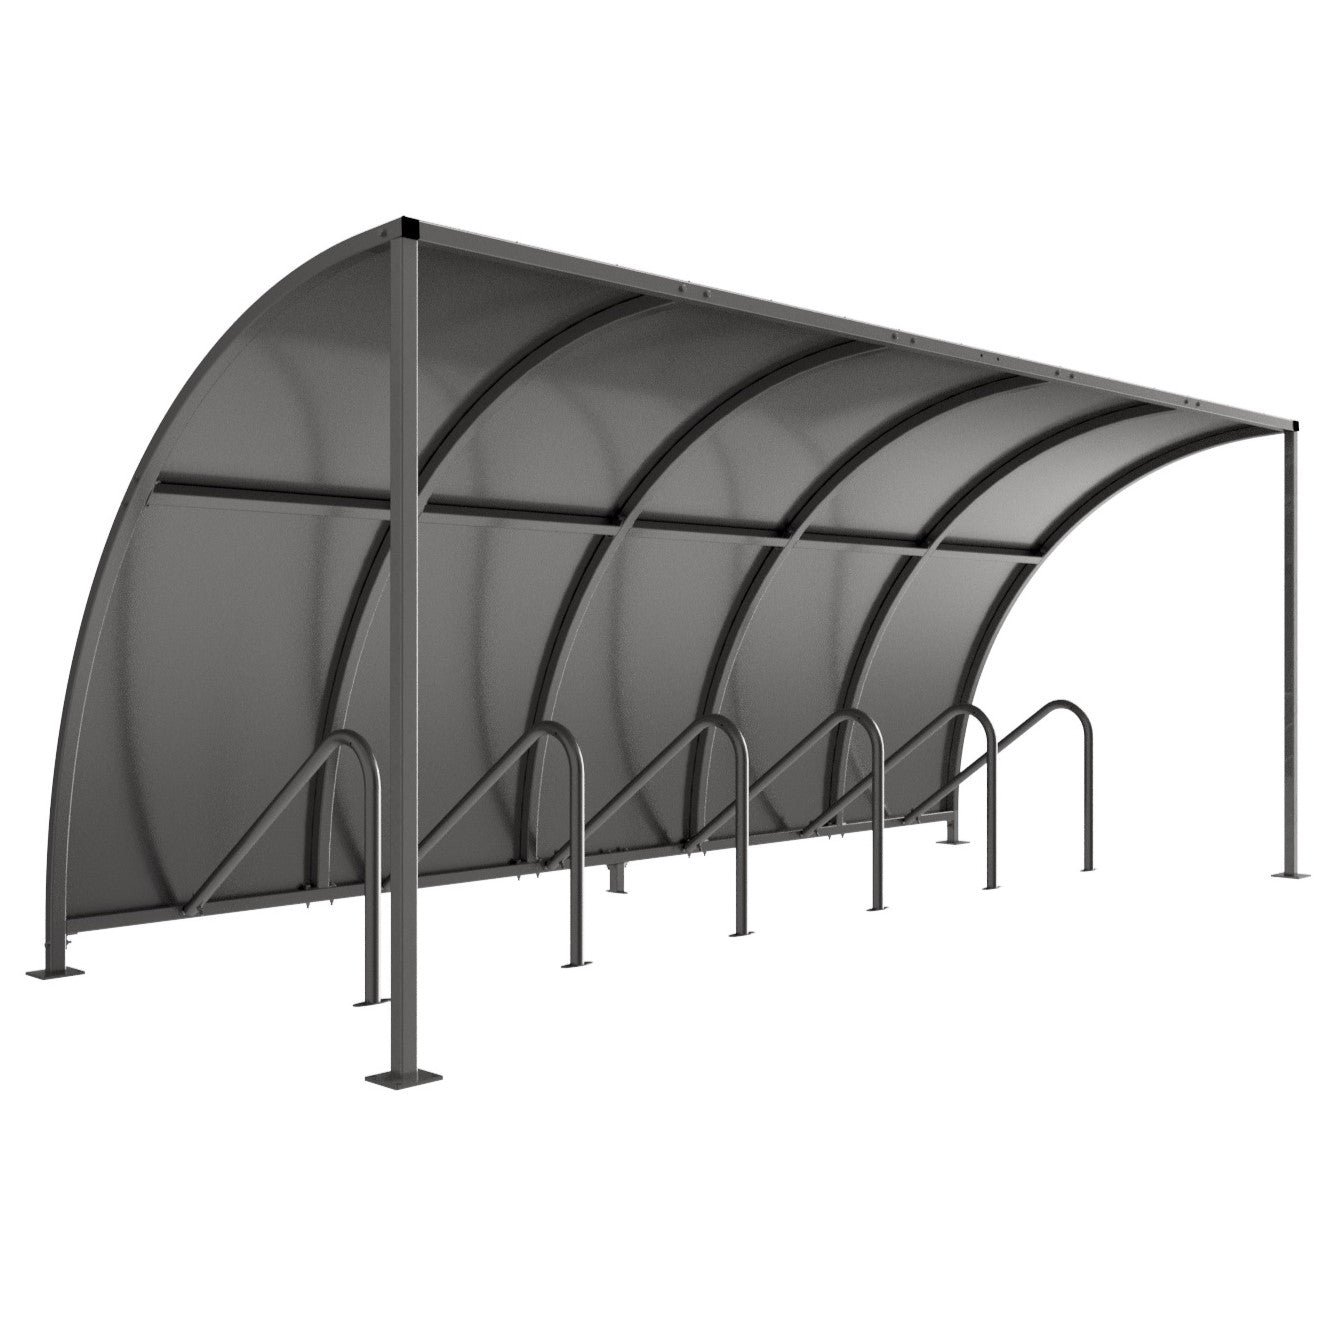 VS1 Cycle Shelter with Galvanised Steel Roof - Galvanised Steel Frame Open Sided